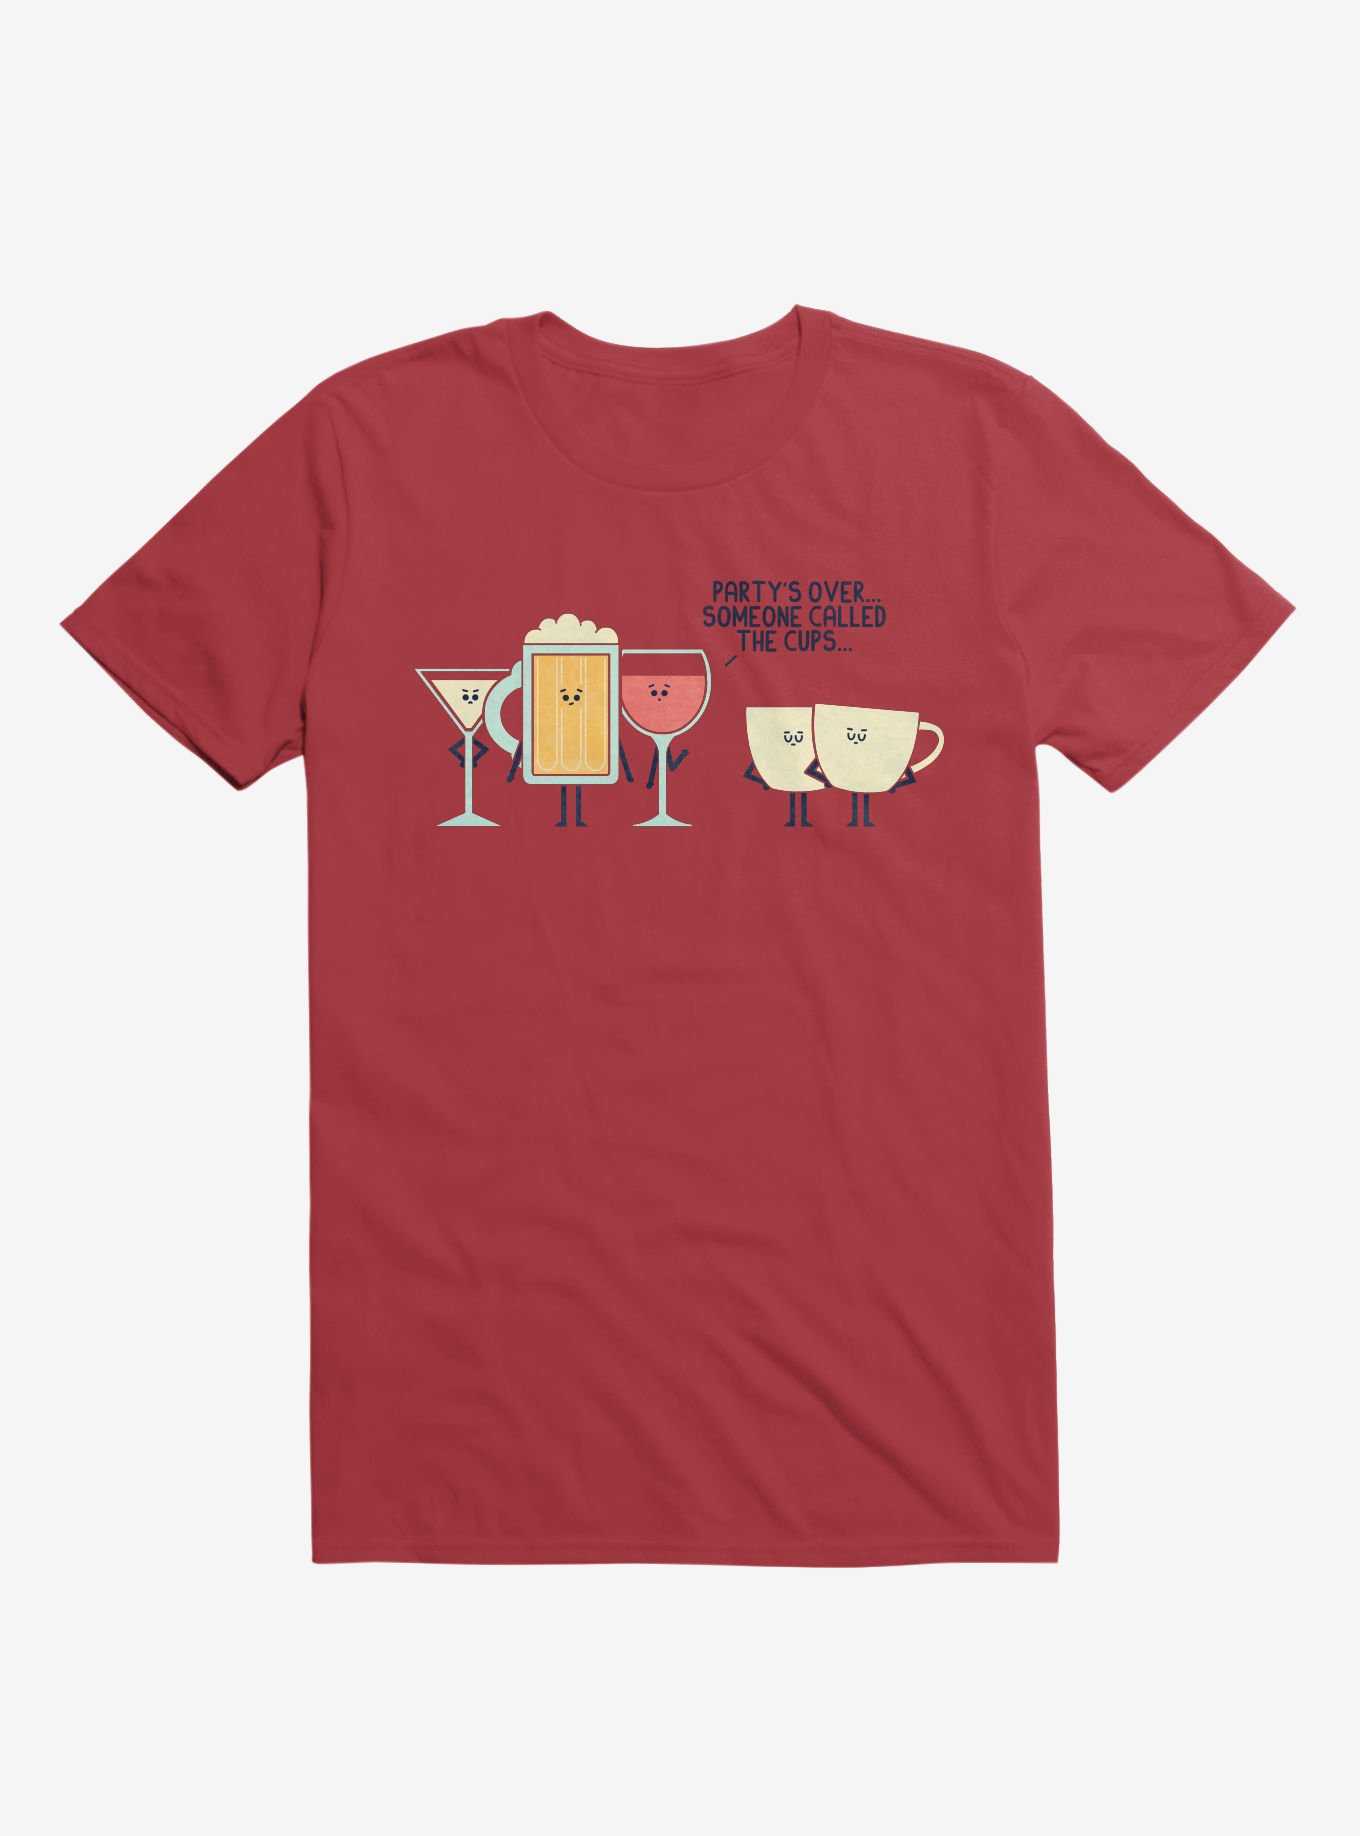 Party's Over Someone Called The Cups Red T-Shirt, , hi-res